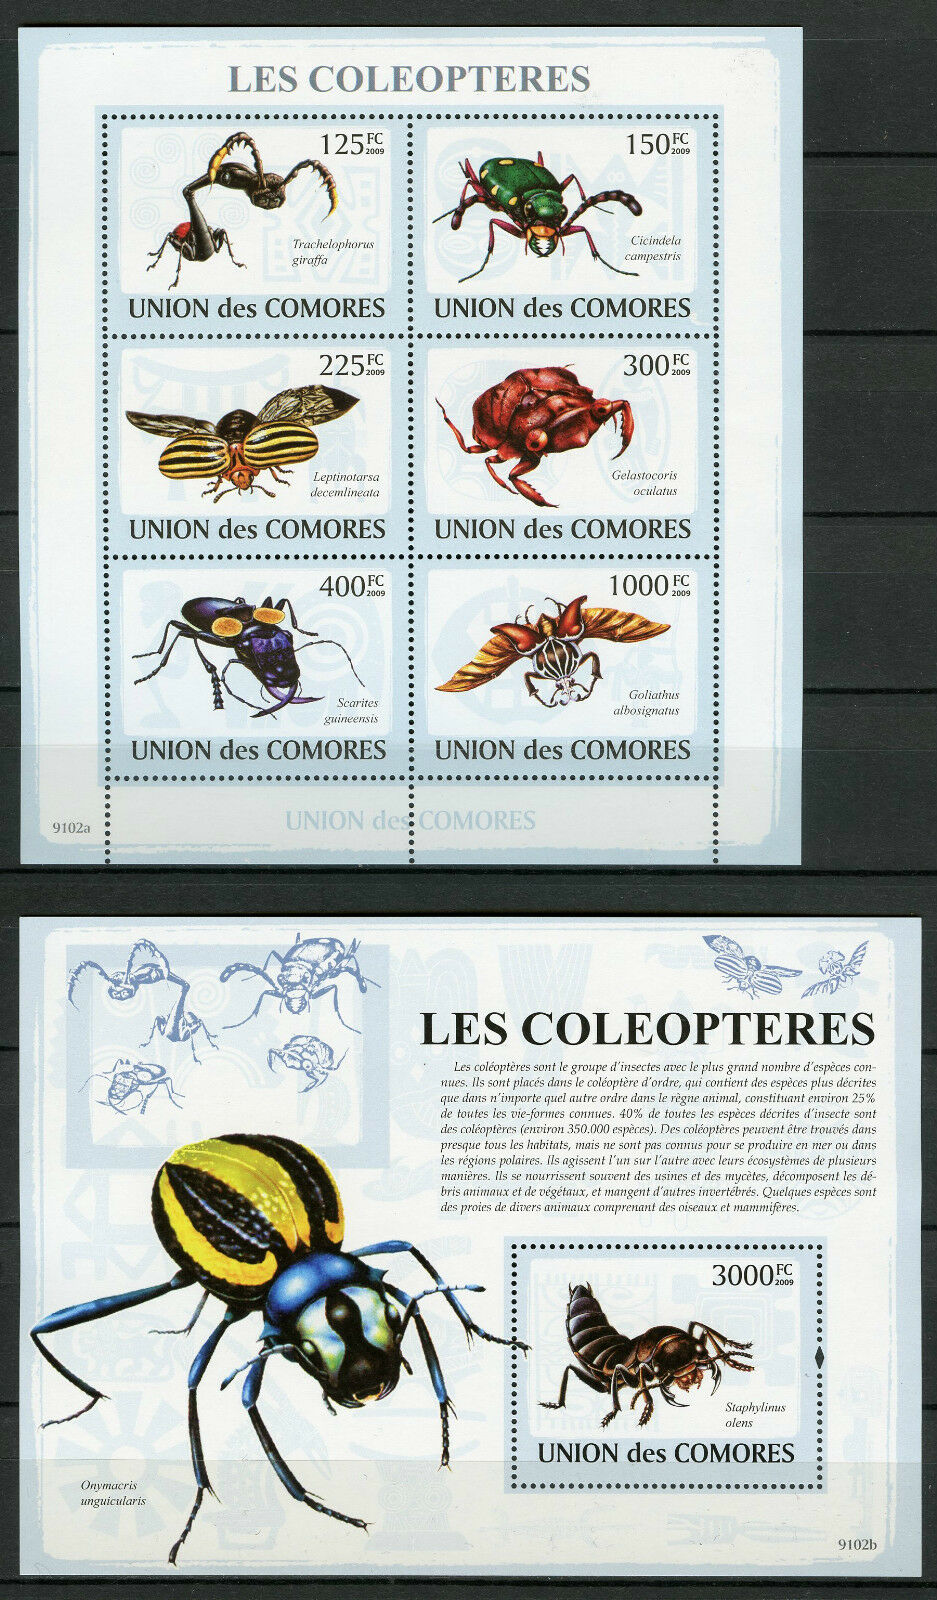 Comoros Comores 2009 MNH Beetles 6v M/S 1v S/S Coleopteres Insects Stamps